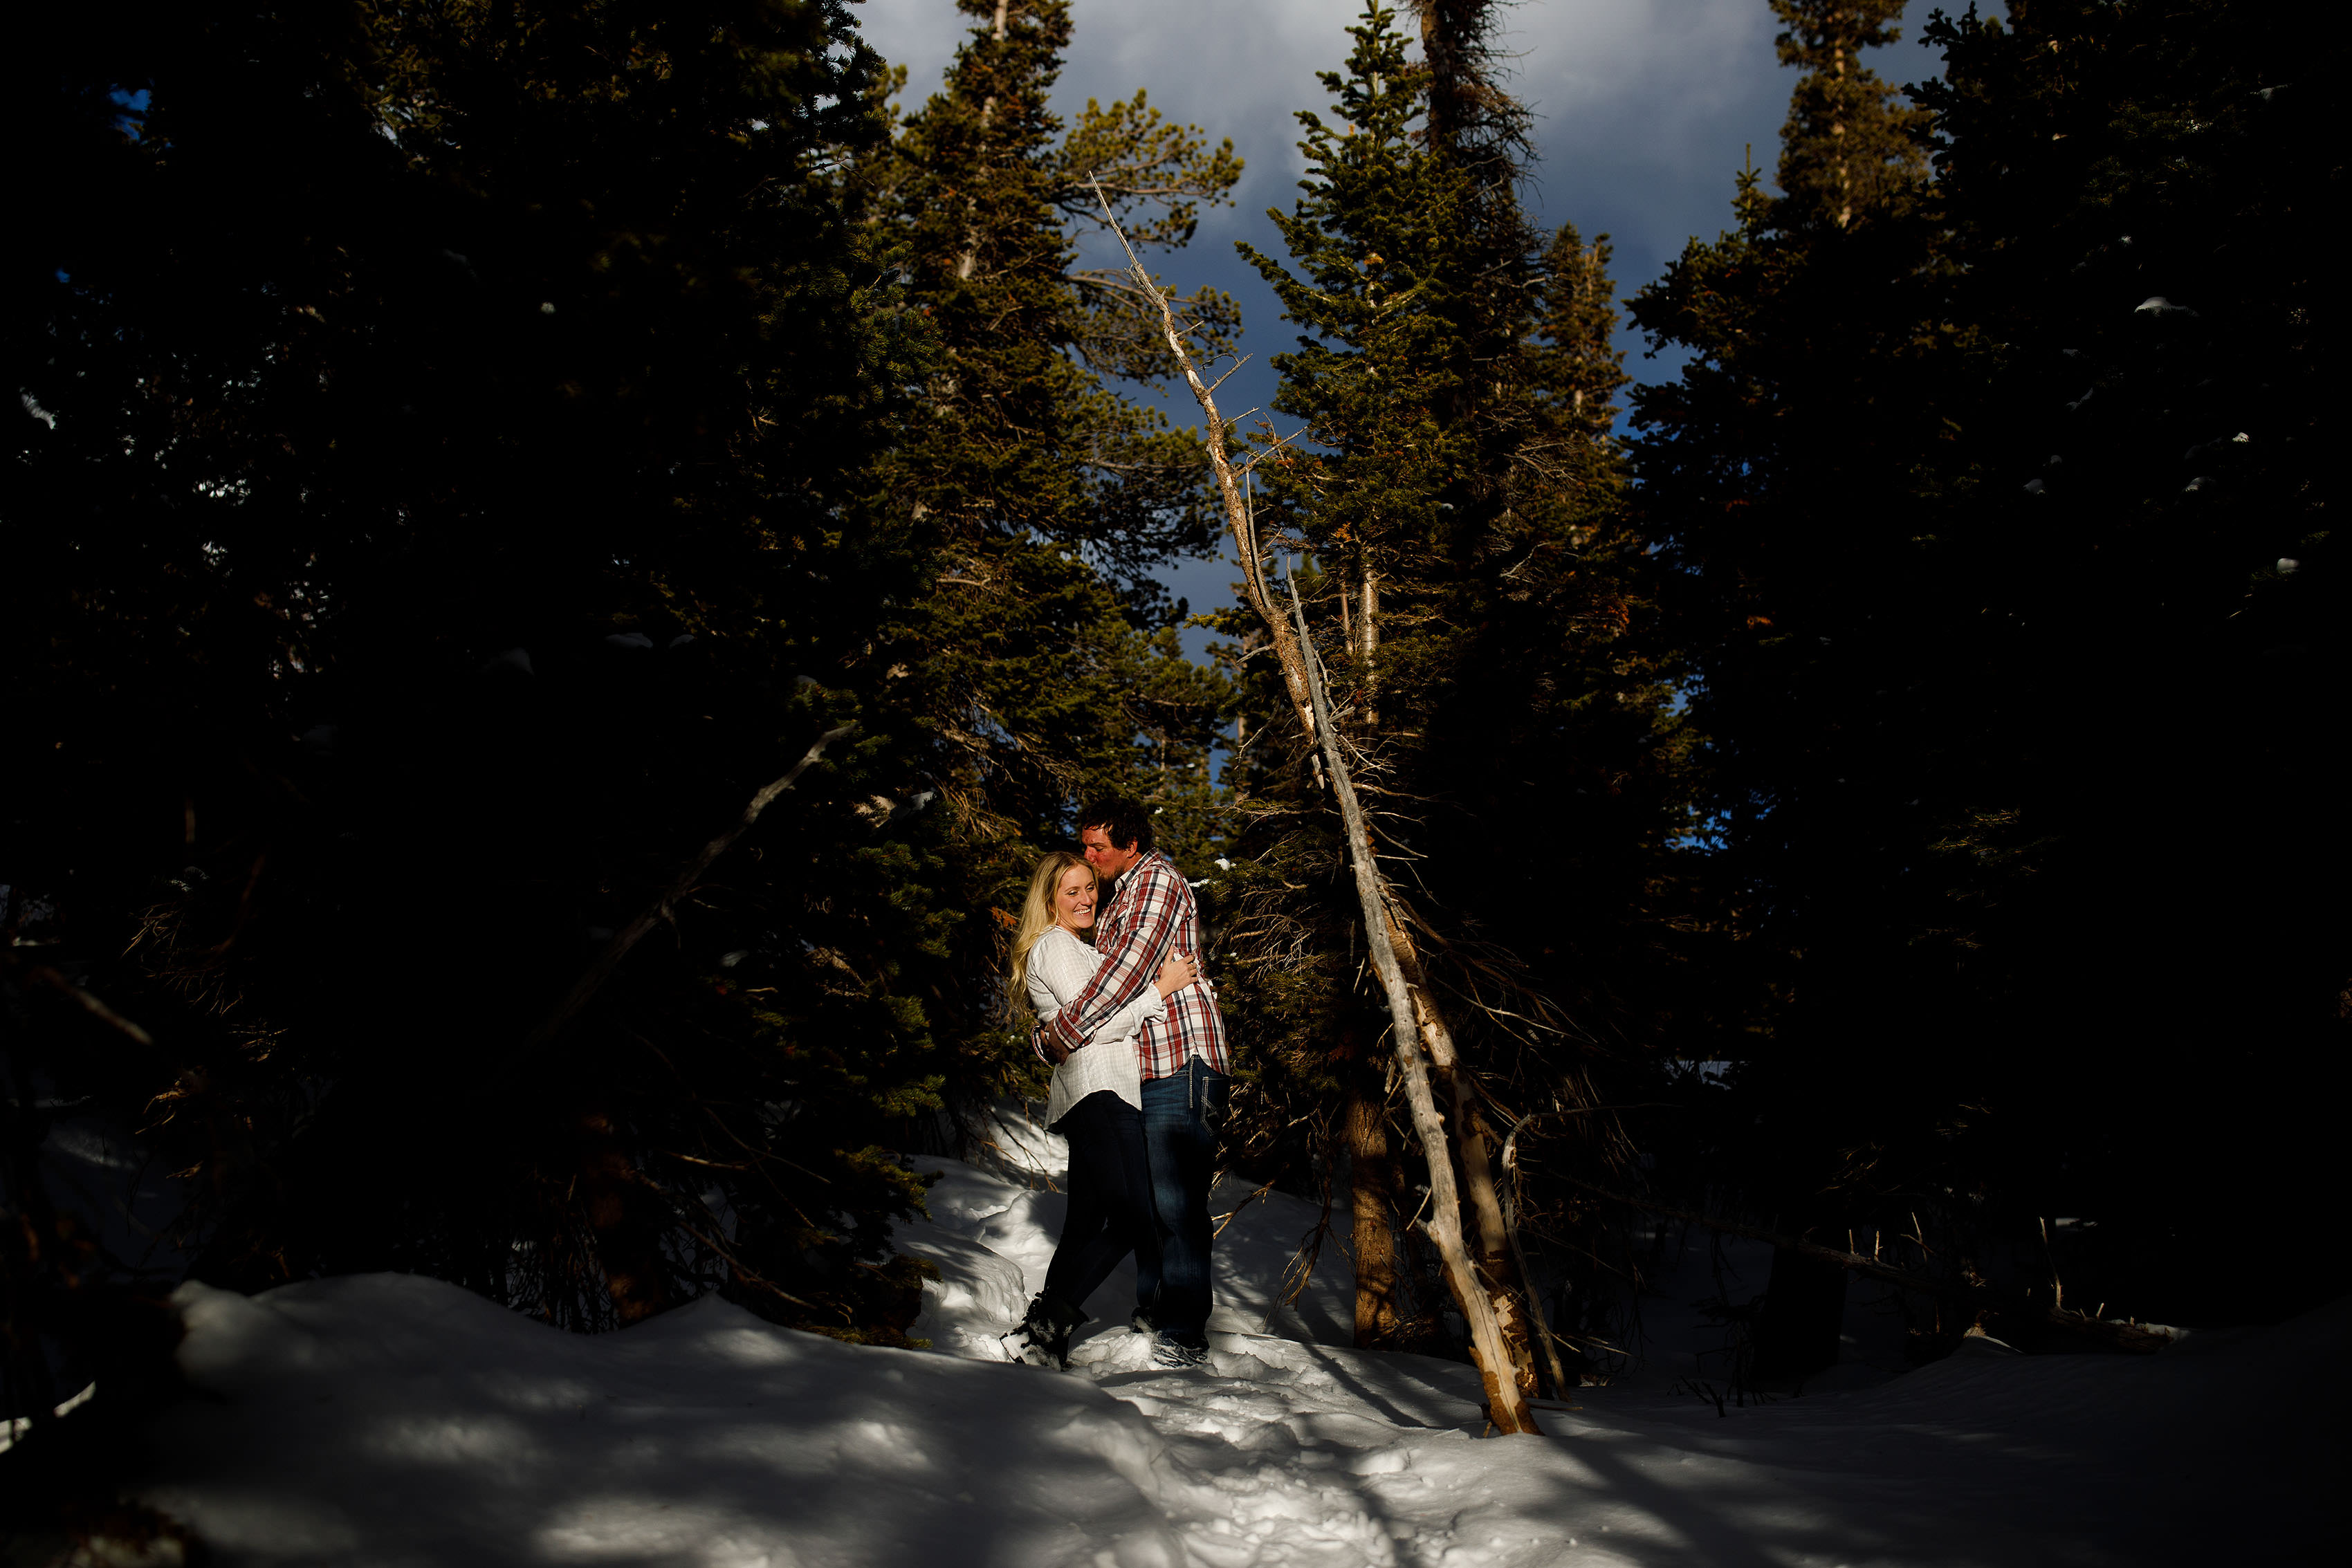 Aaron kisses Meaghan in the trees at Brainard Lake during their winter engagement session in Colorado